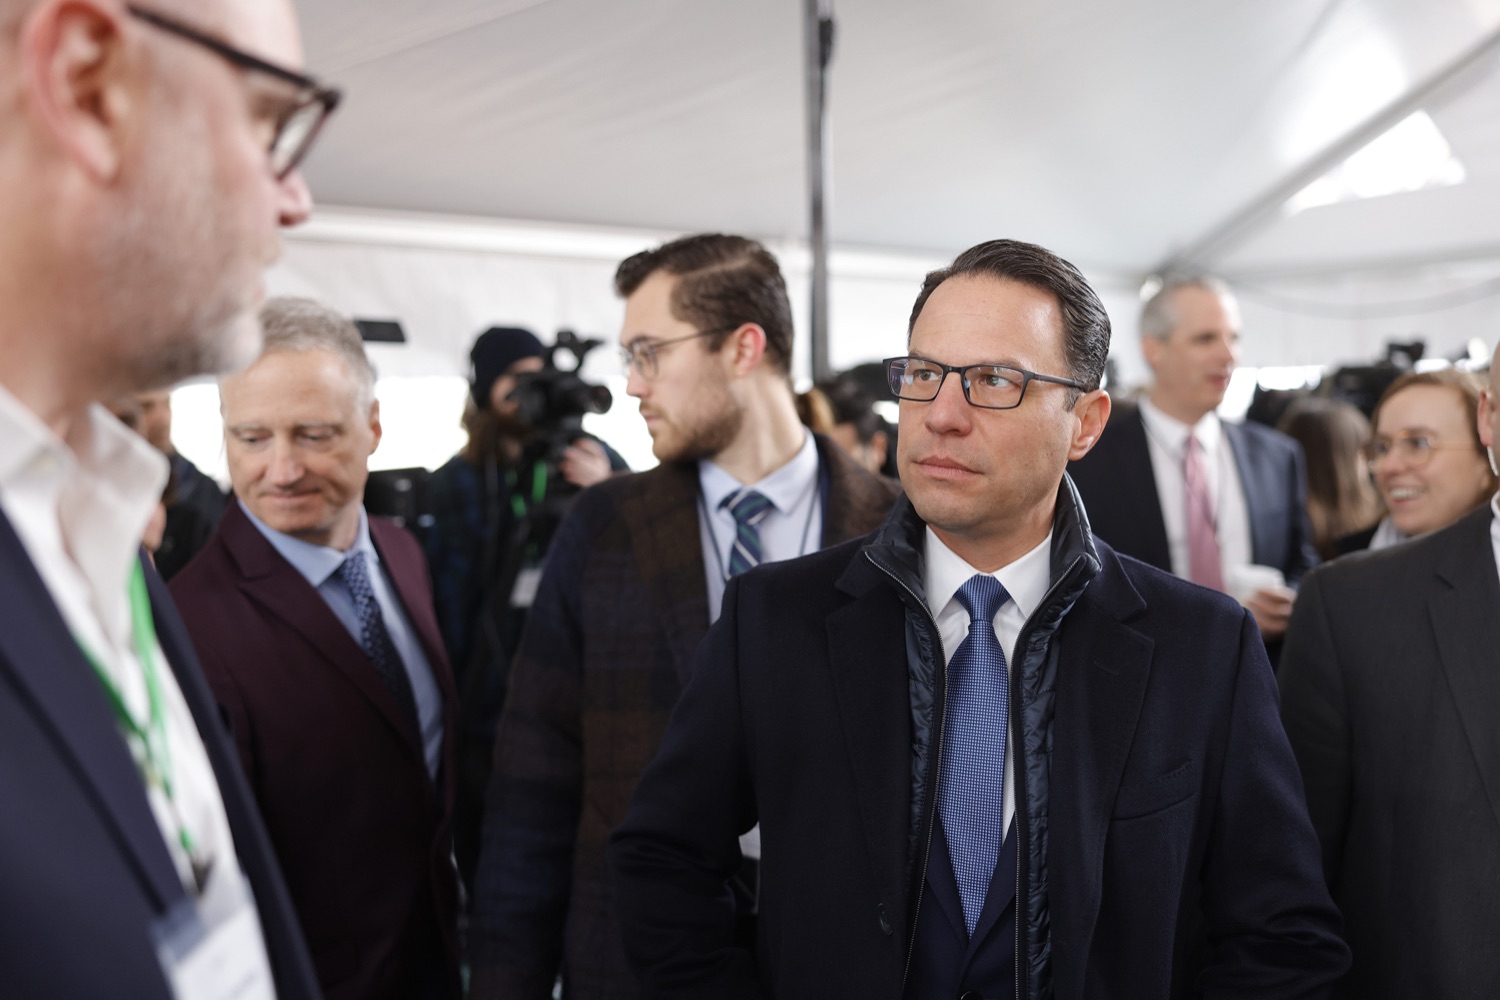 Pennsylvania Governor Josh Shapiro speaks with attendees.  Pennsylvania Governor Josh Shapiro participates in a groundbreaking for Spark Therapeutics at the future site of their new building, at 30th and Chestnut streets.  FEBRUARY 28, 2023 - PHILADELPHIA, PA<br><a href="https://filesource.amperwave.net/commonwealthofpa/photo/22728_gov_spark_dz_0021.JPG" target="_blank">⇣ Download Photo</a>